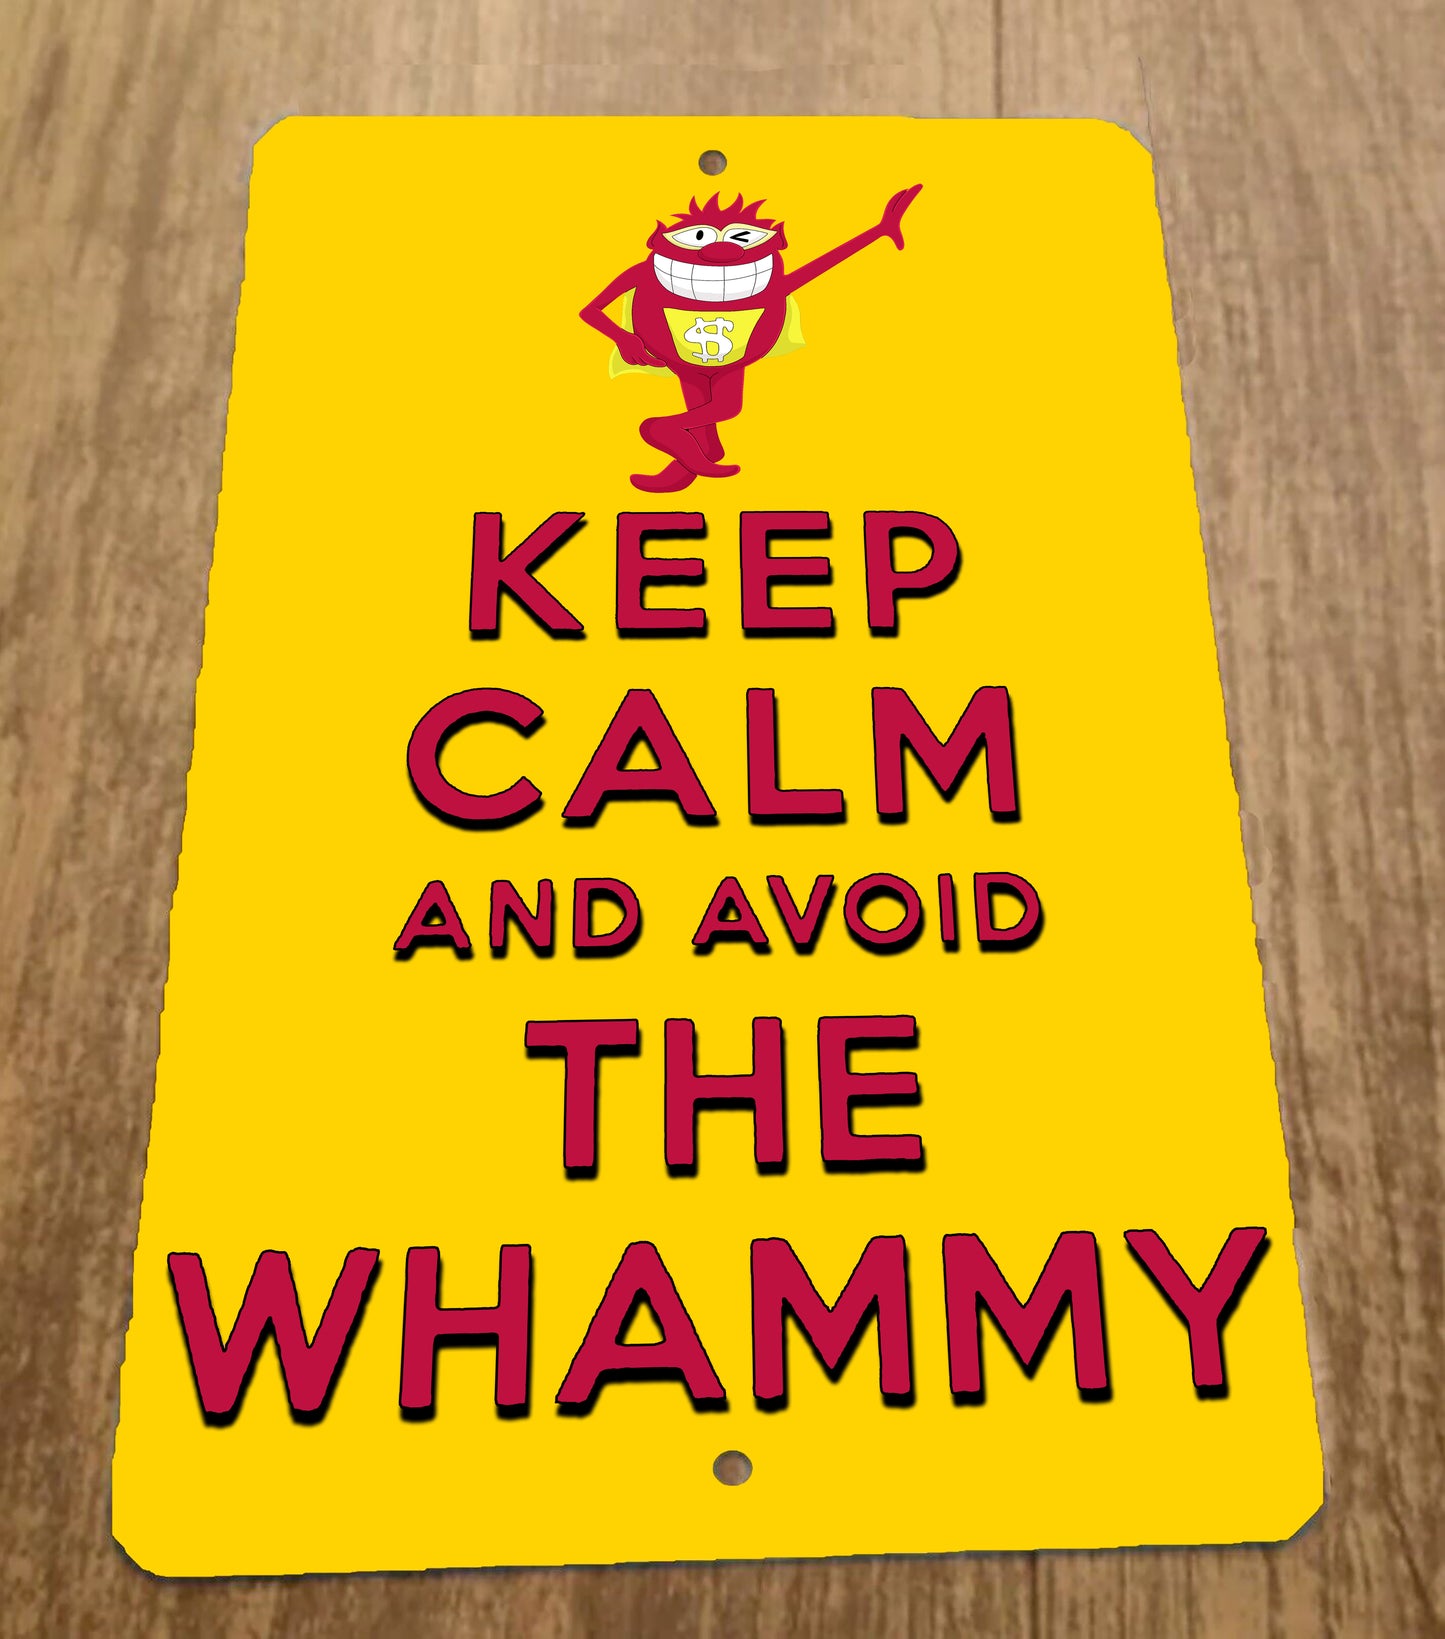 Keep Calm and Avoid the Whammy Press Your Luck 8x12 Metal Wall Movie Sign Game TV Show